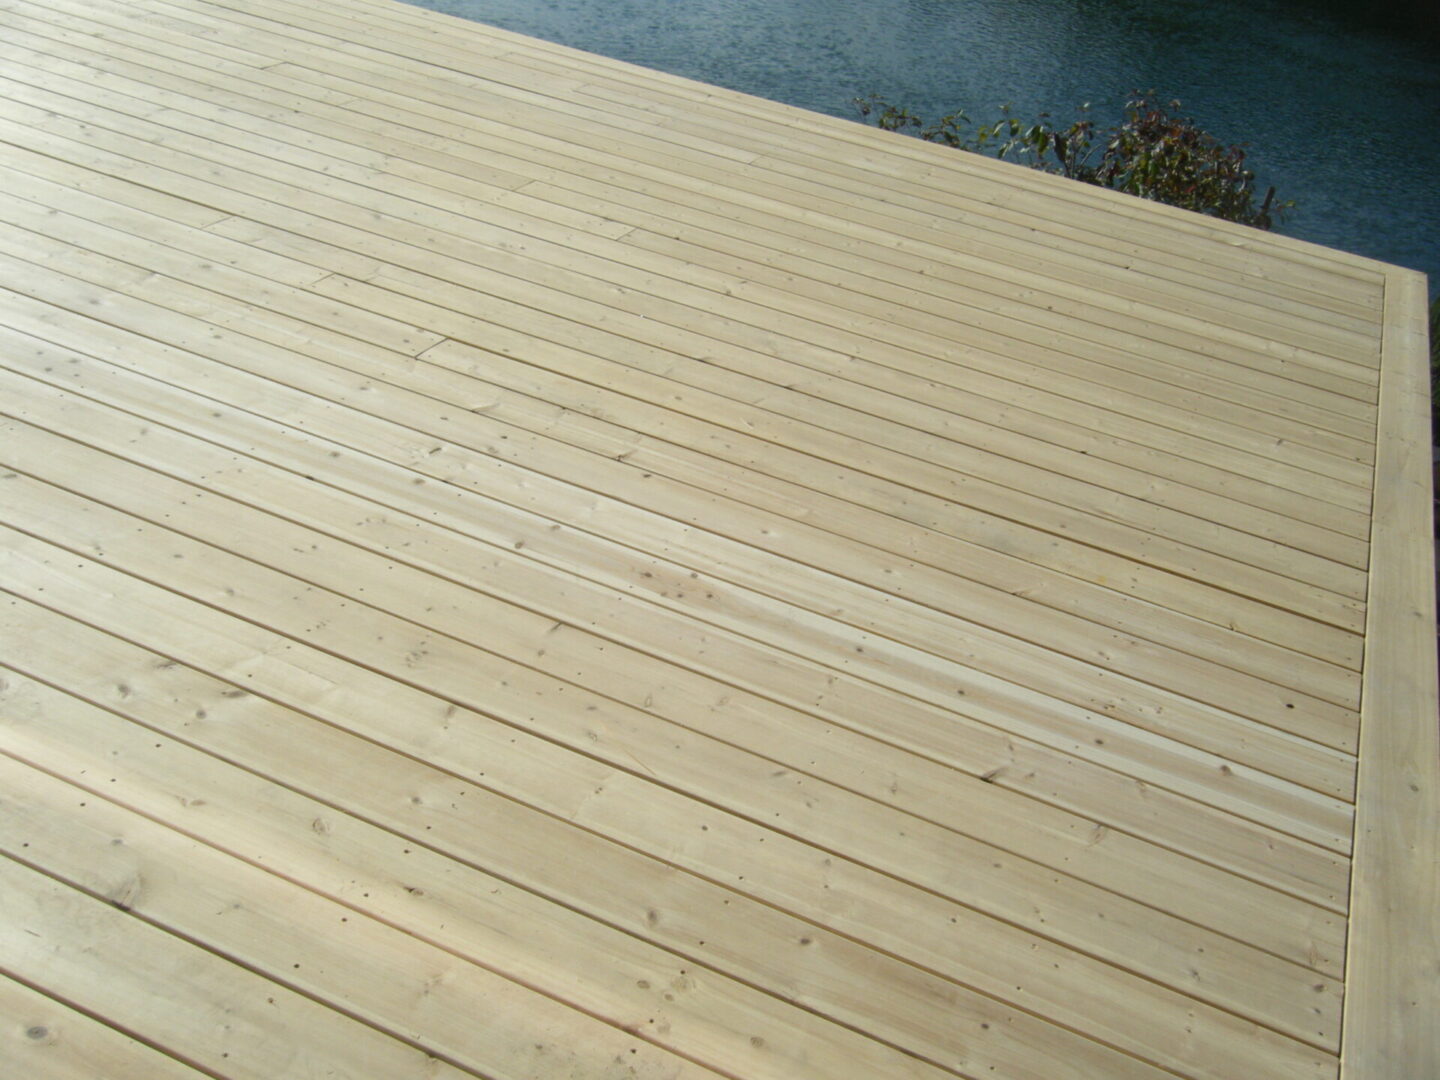 Light-colored wooden deck